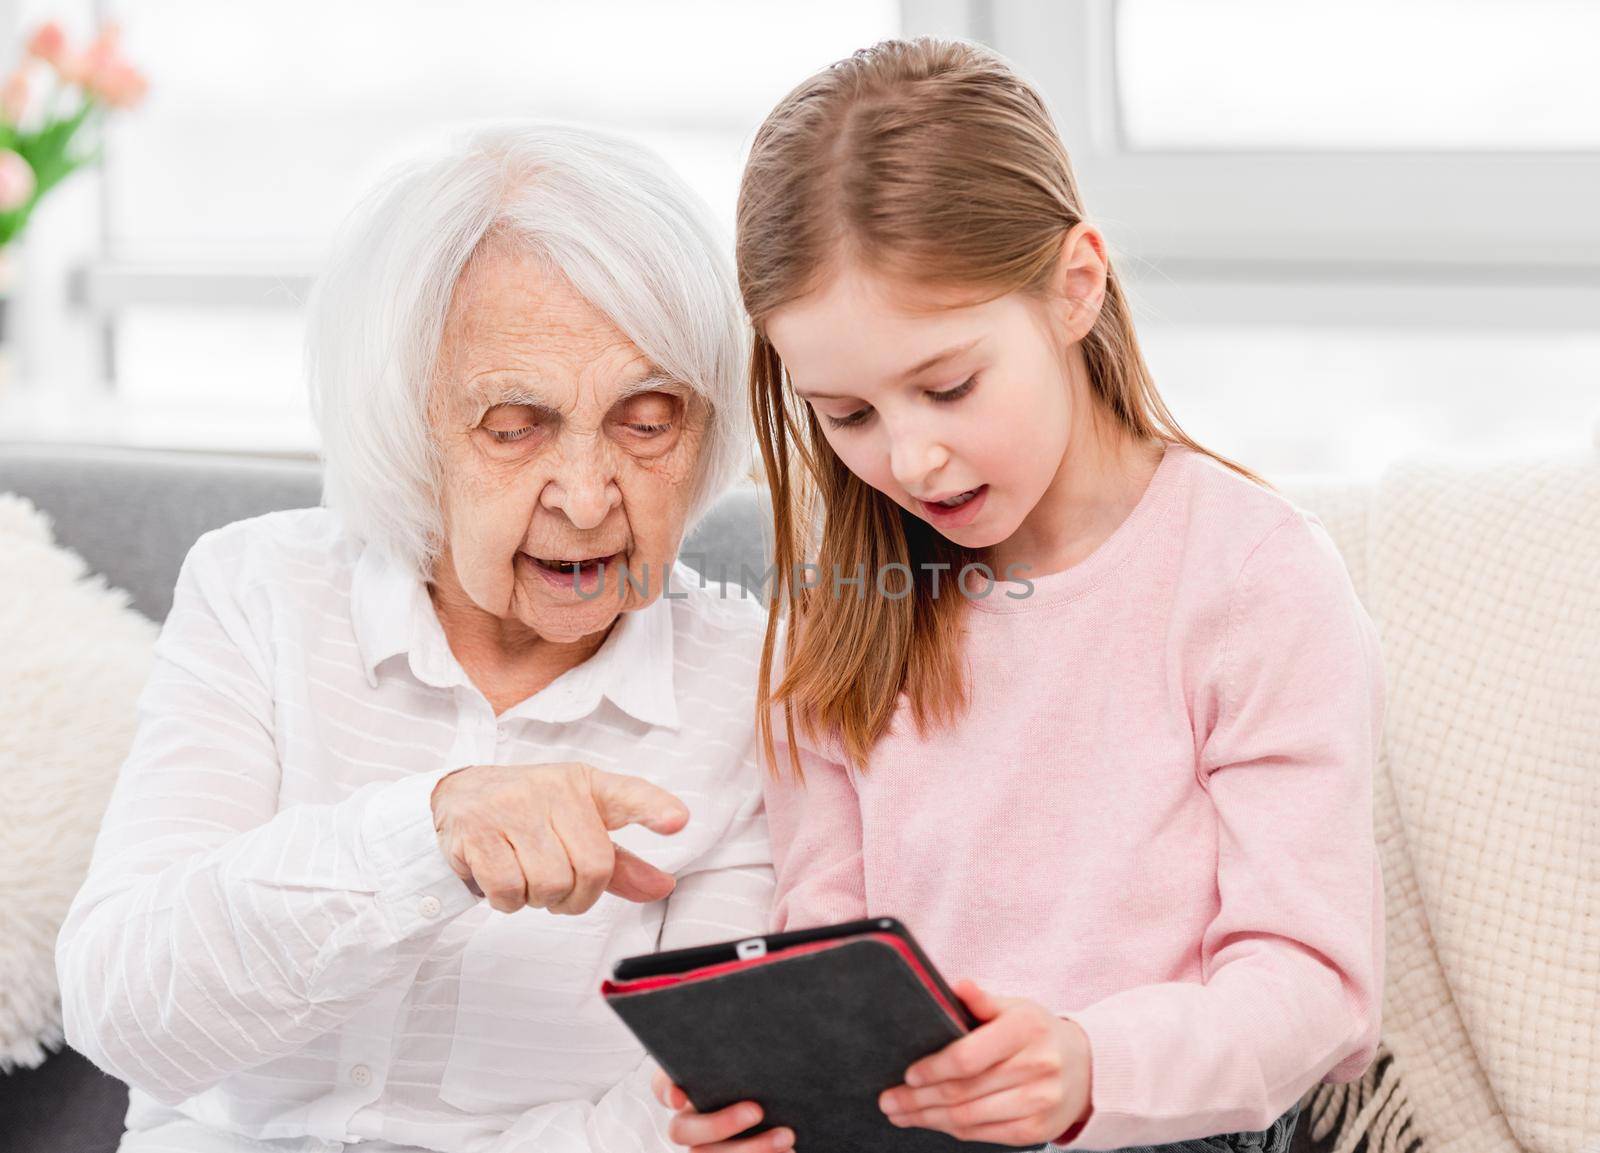 Grandaughter teaching grandmother use tablet. Family portrait at home with gadgets